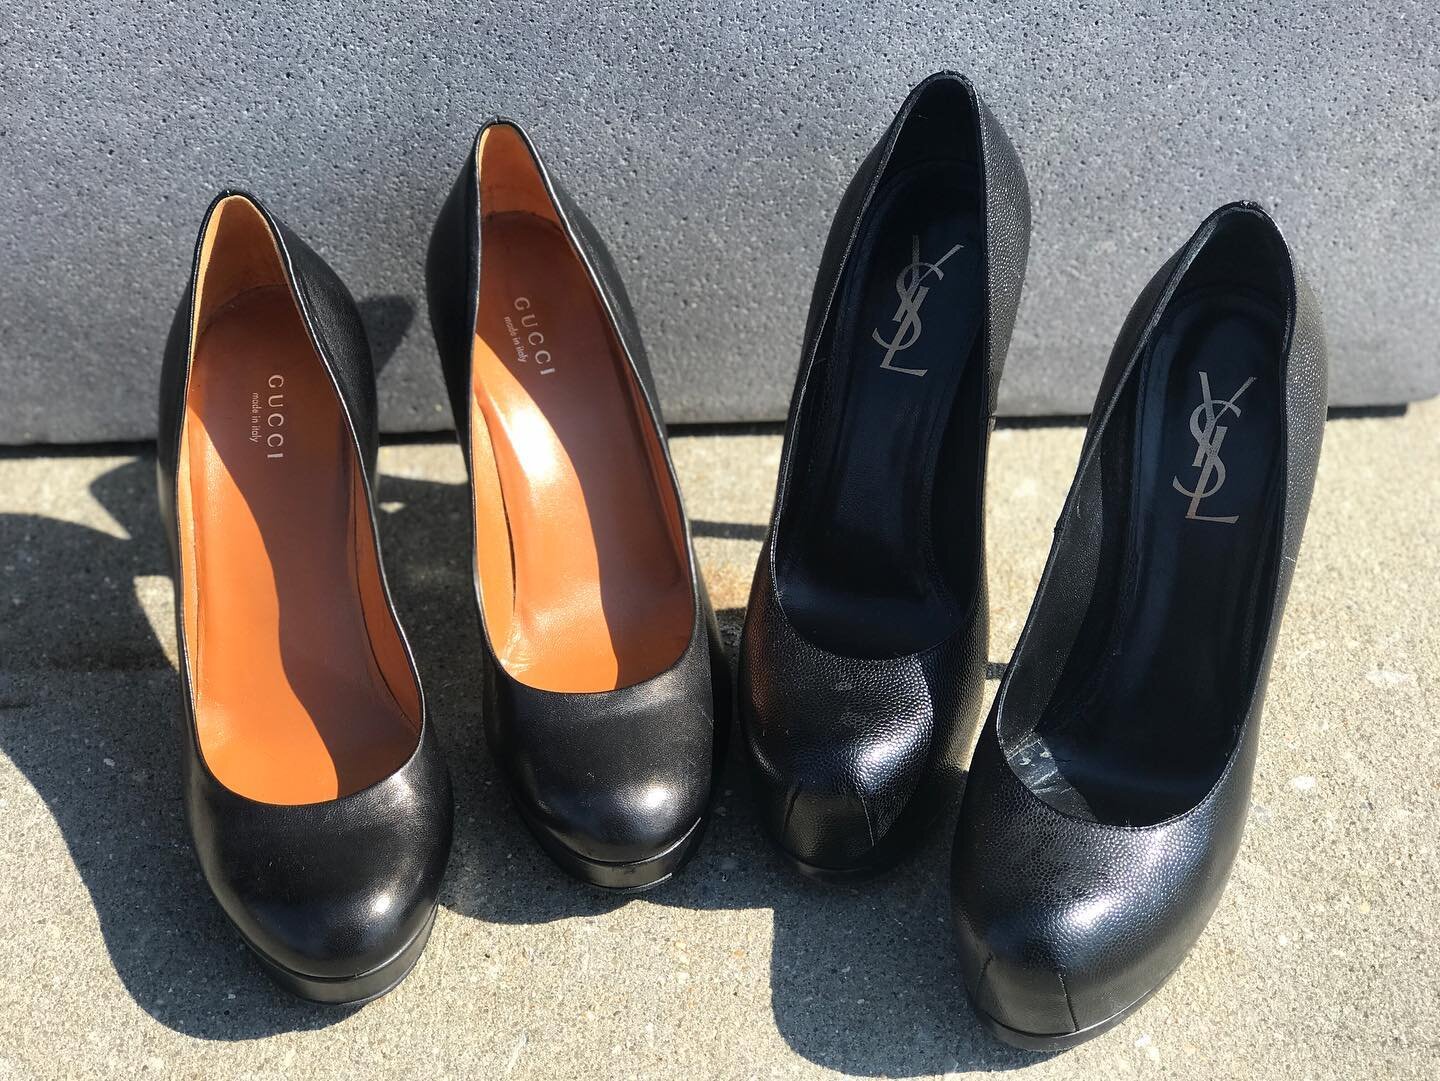 We 🖤 these designer pumps! Perfect to elevate any look! 
&bull;Third-Fifth Slide: Size 38, $125.95
&bull;Sixth-Eighth Slide: Size 38.5 $150.95
&bull;
For inquiries, please call or email us!
☎️ 267-807-1295 
📧snyder@greenestreet.com 
&bull;
@shopgre